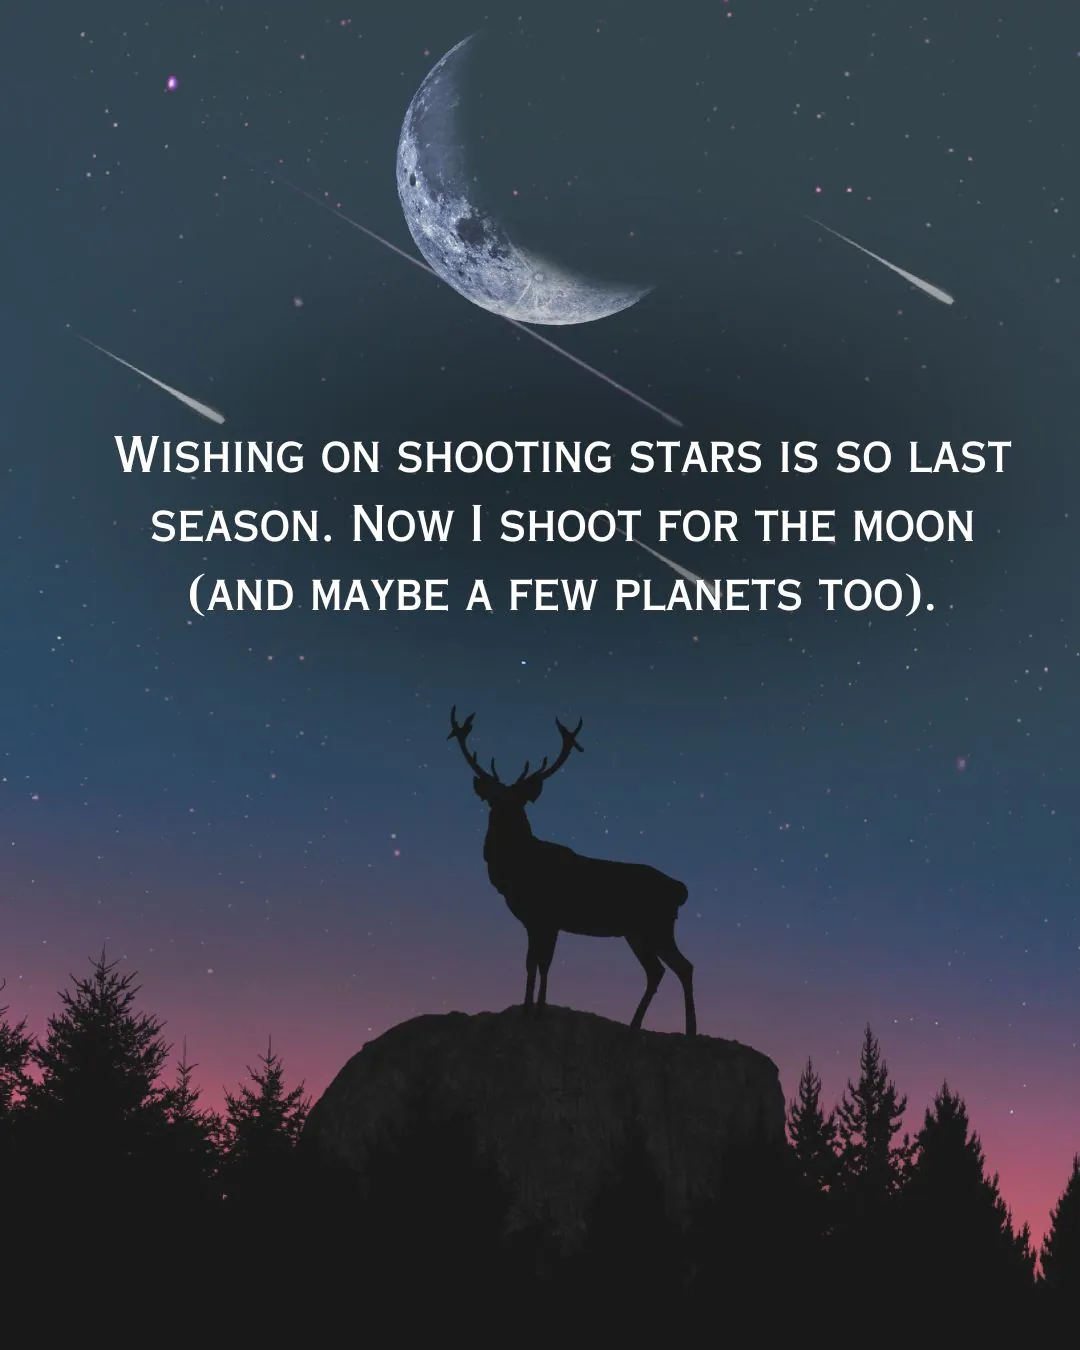 Night Sky Quotes for Instagram for Girl With Image 4